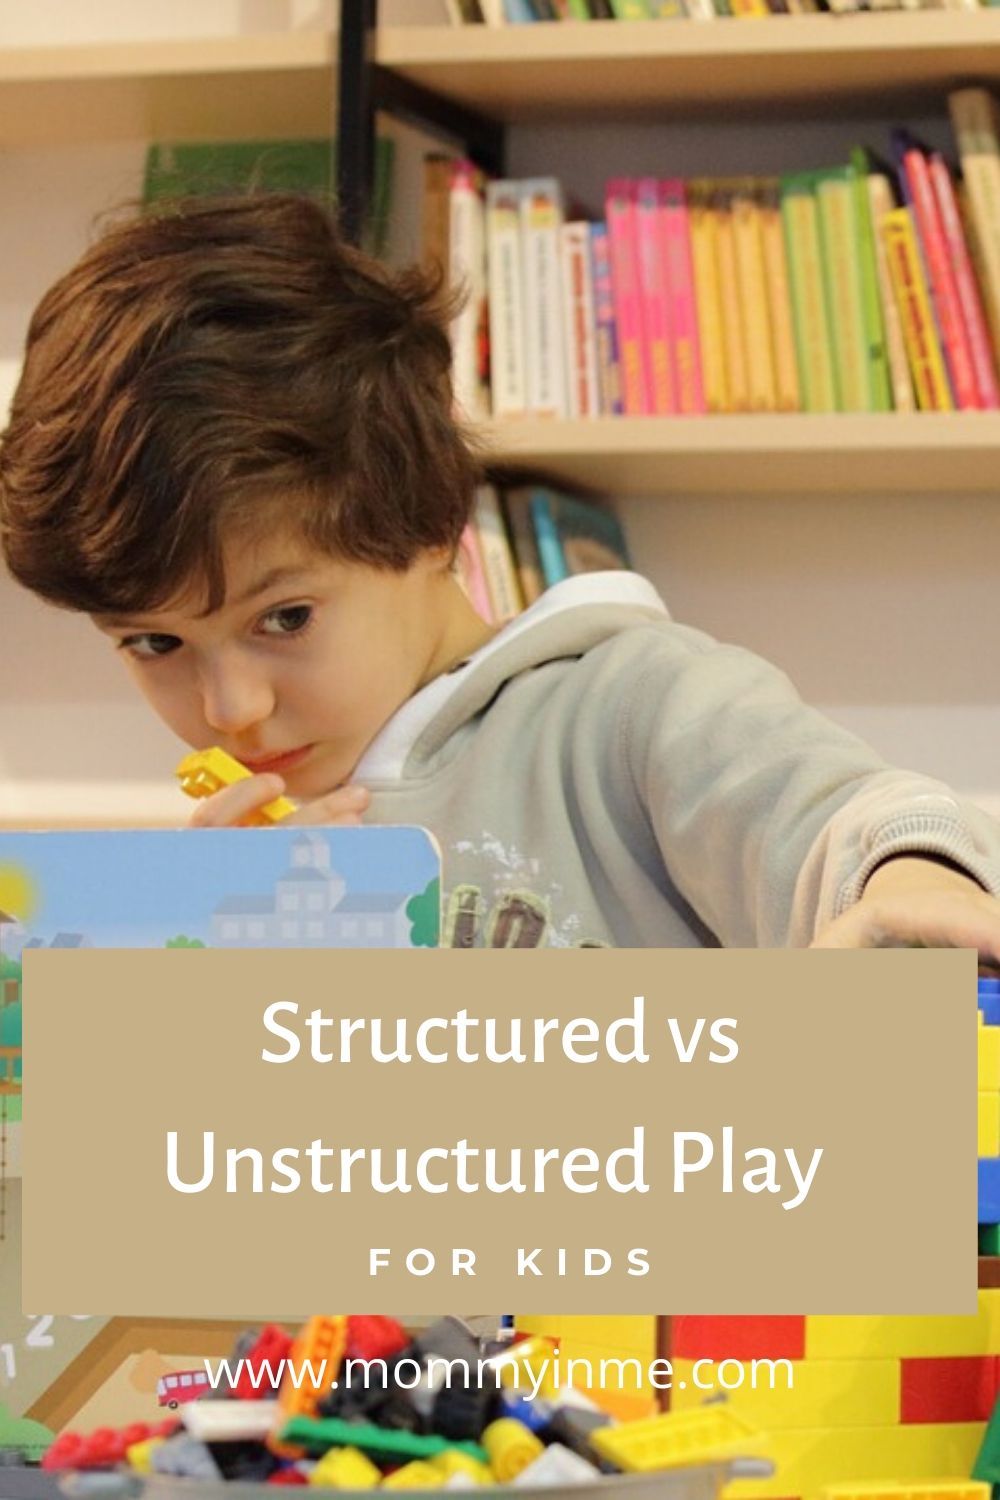 Free Playtime-unstructured activities